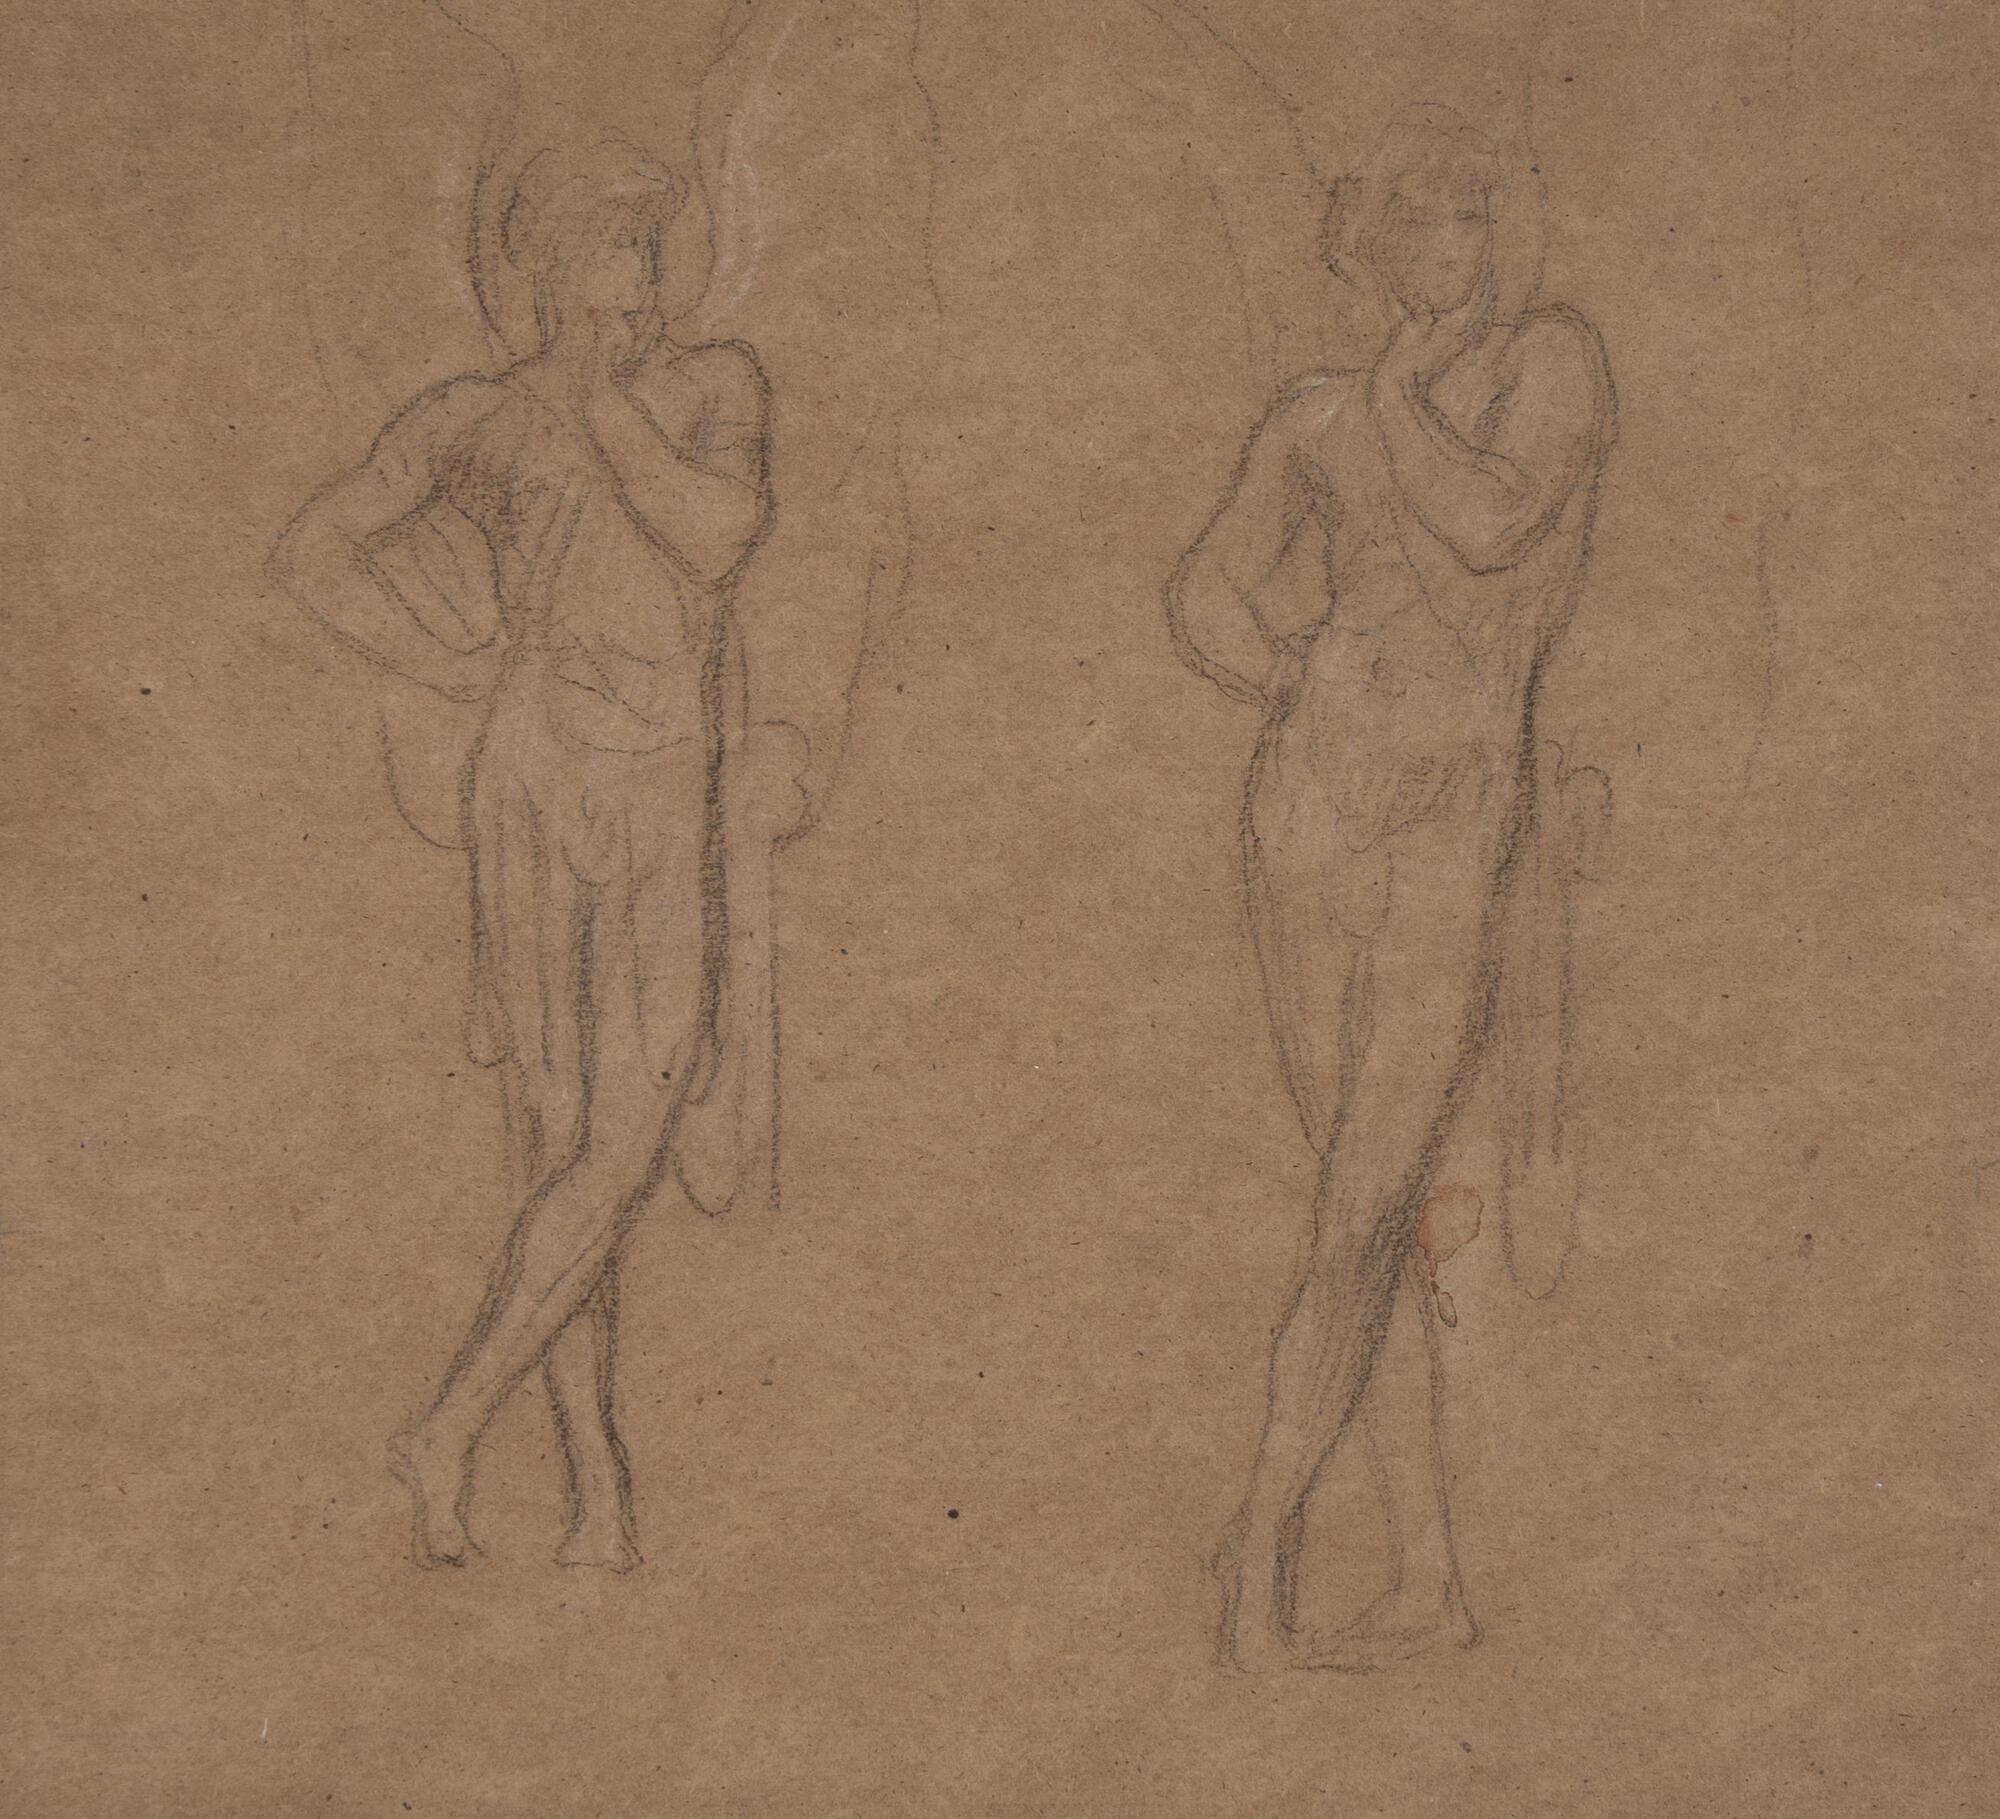 A drawing of two angels side by side in almost the same position.